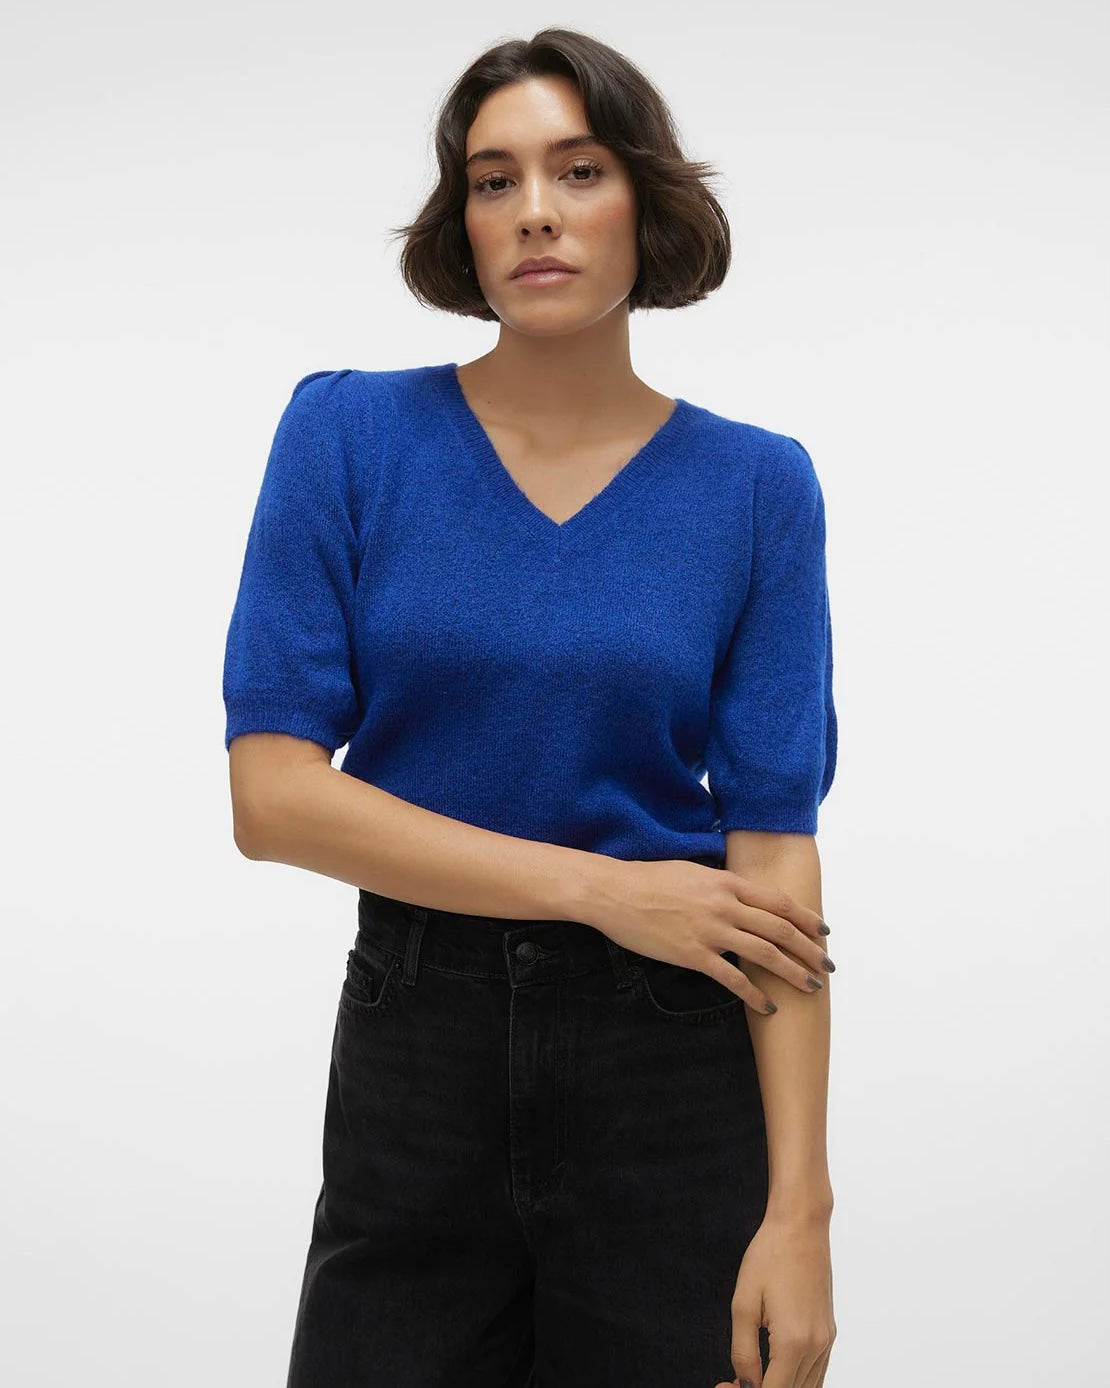 The Elly V-Neck Puff Pullover Top